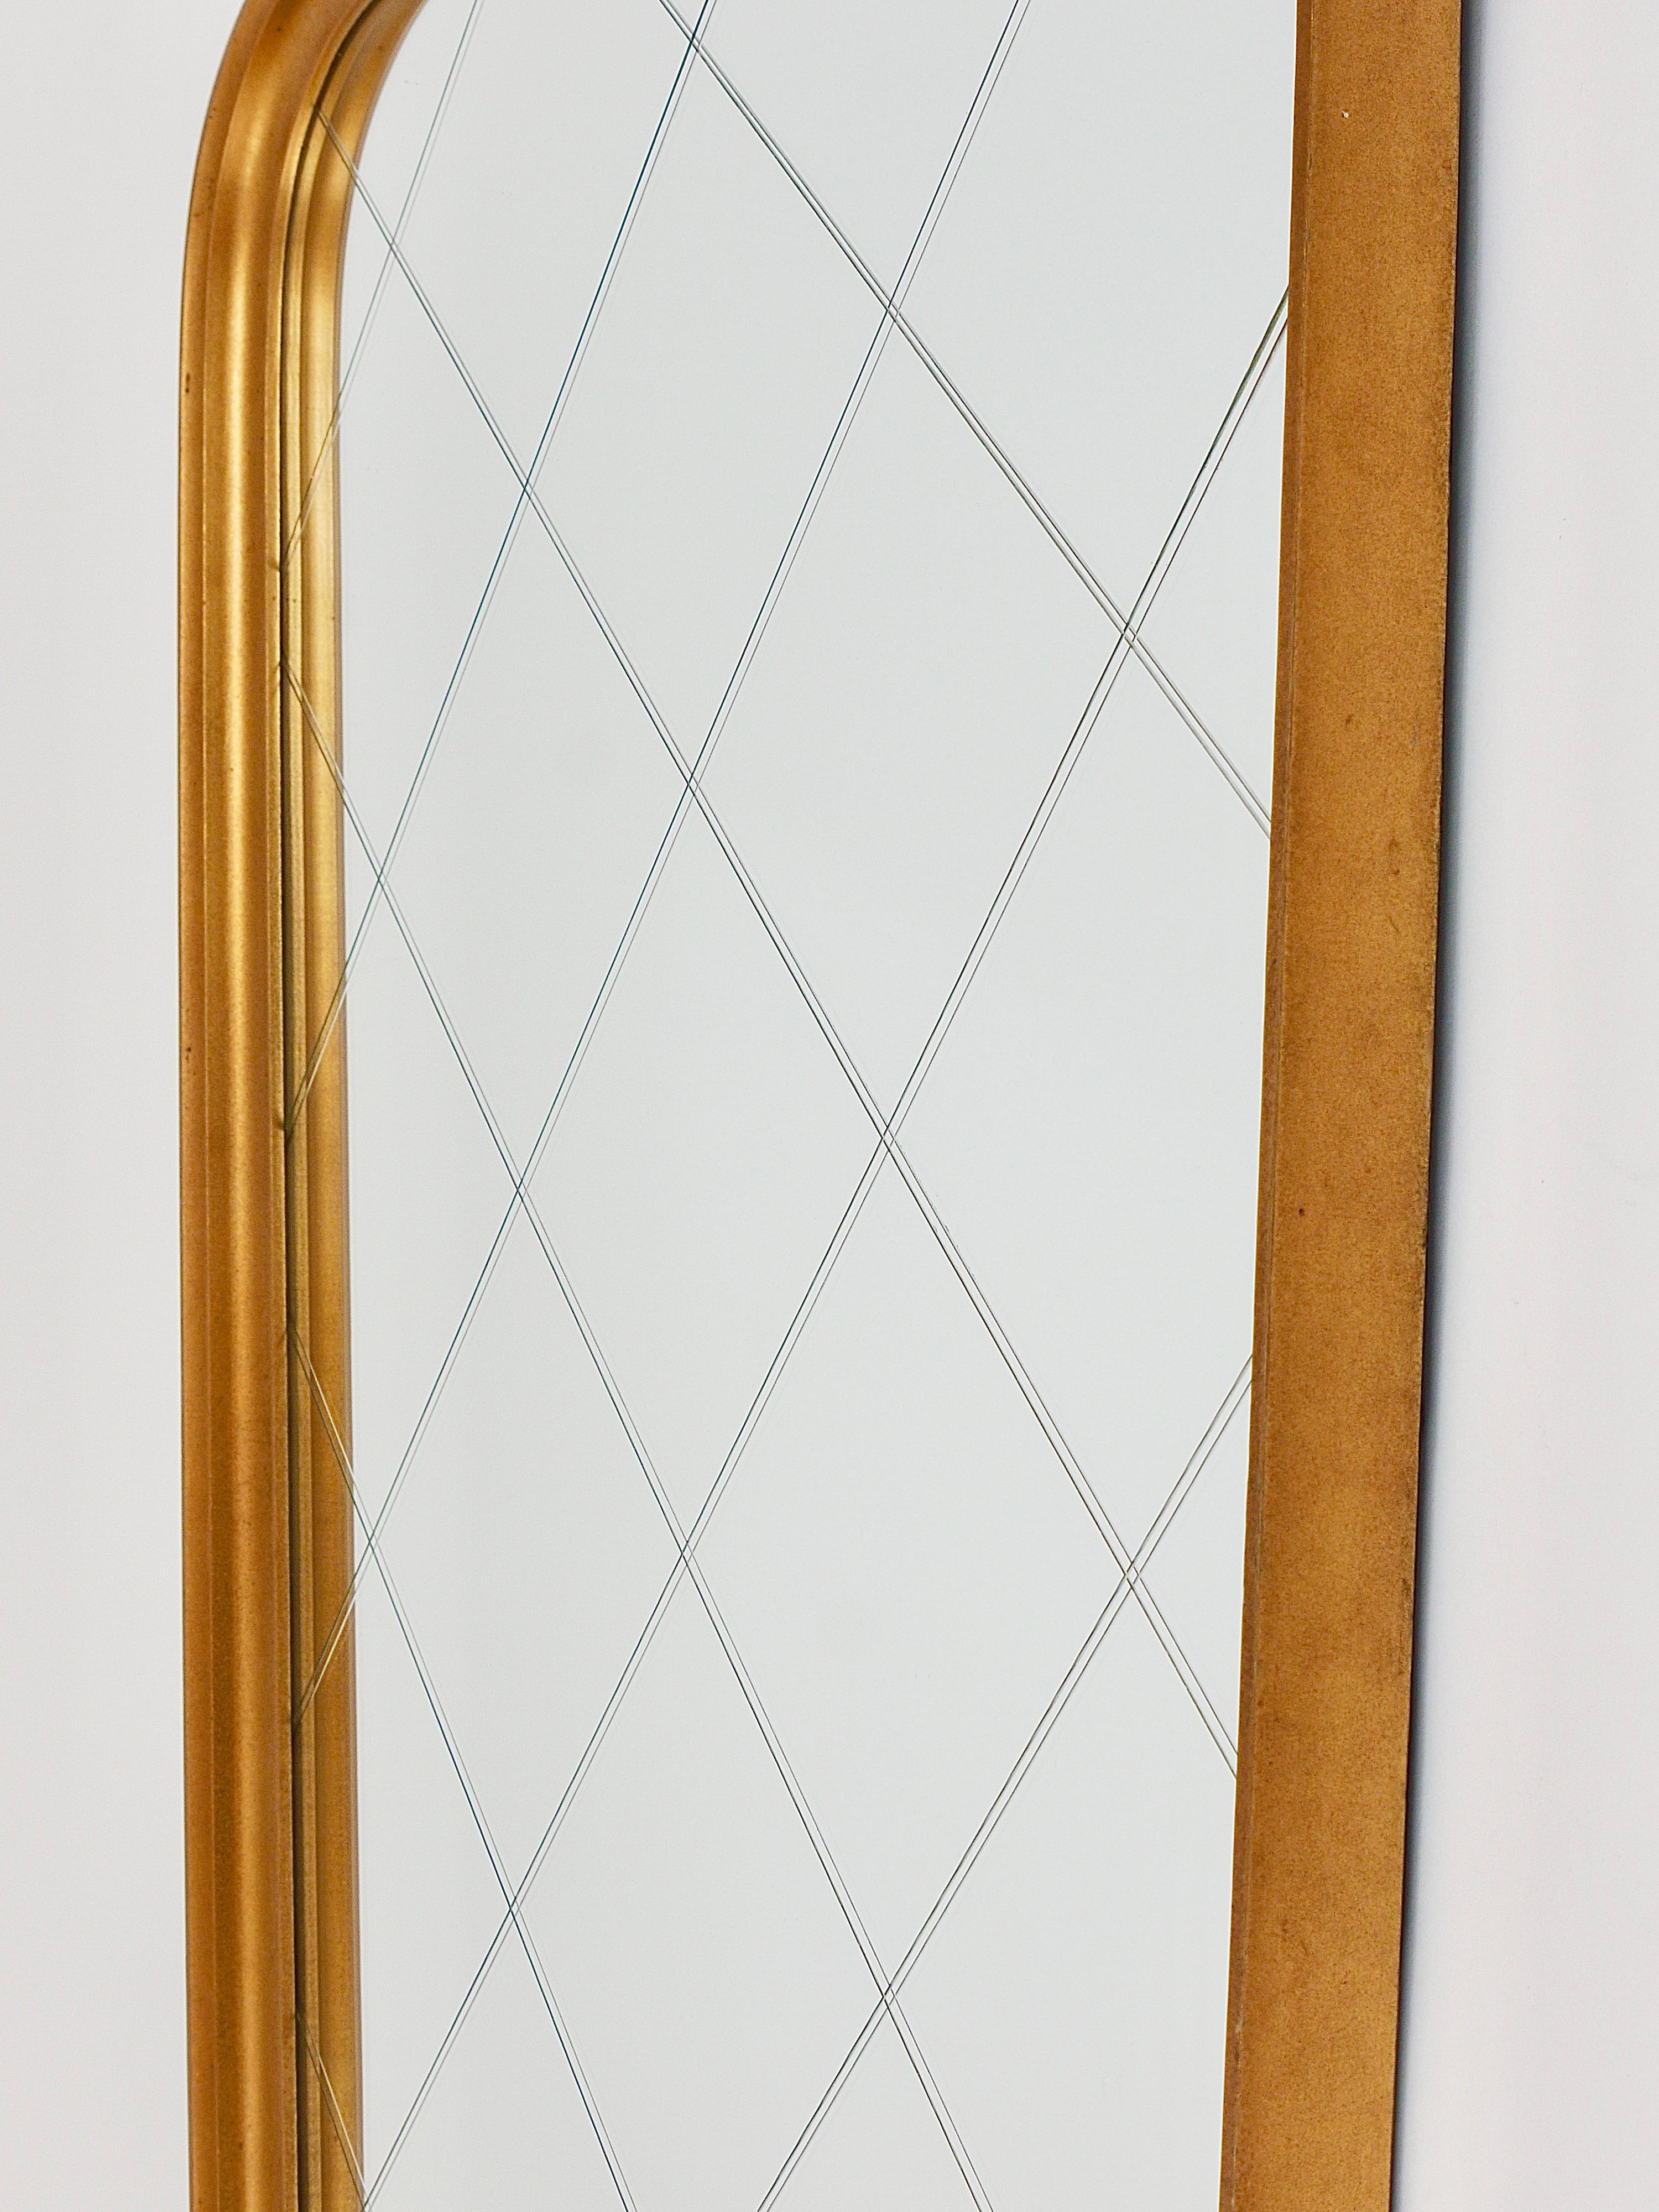 Large Mid-Century Golden Wall Mirror with Faceted Check Pattern, Austria, 1950s For Sale 13